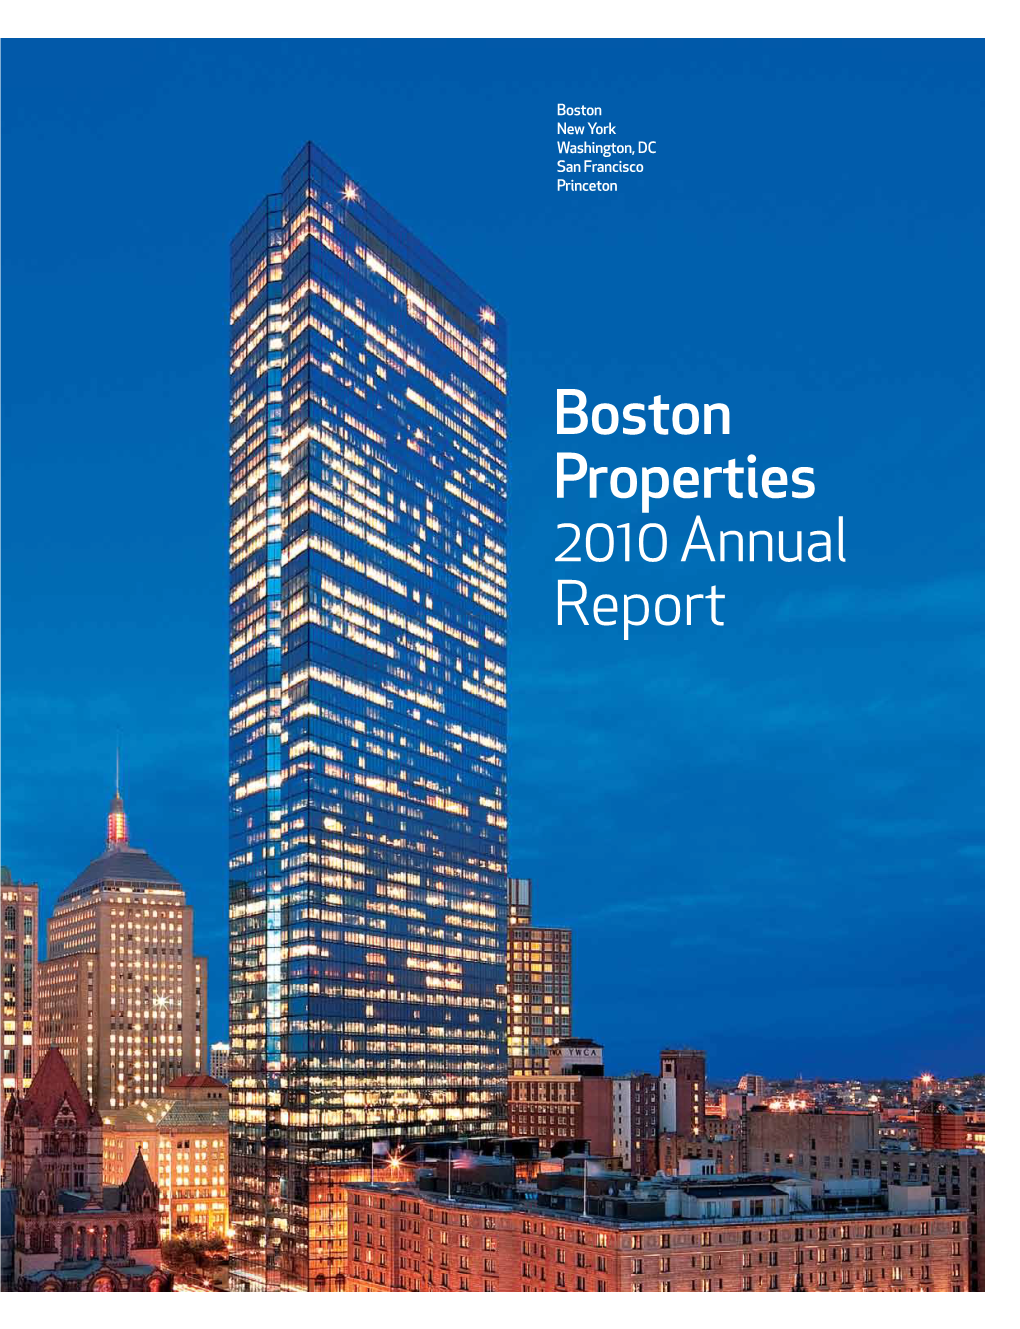 Boston Properties 2010 Annual Report on the Cover